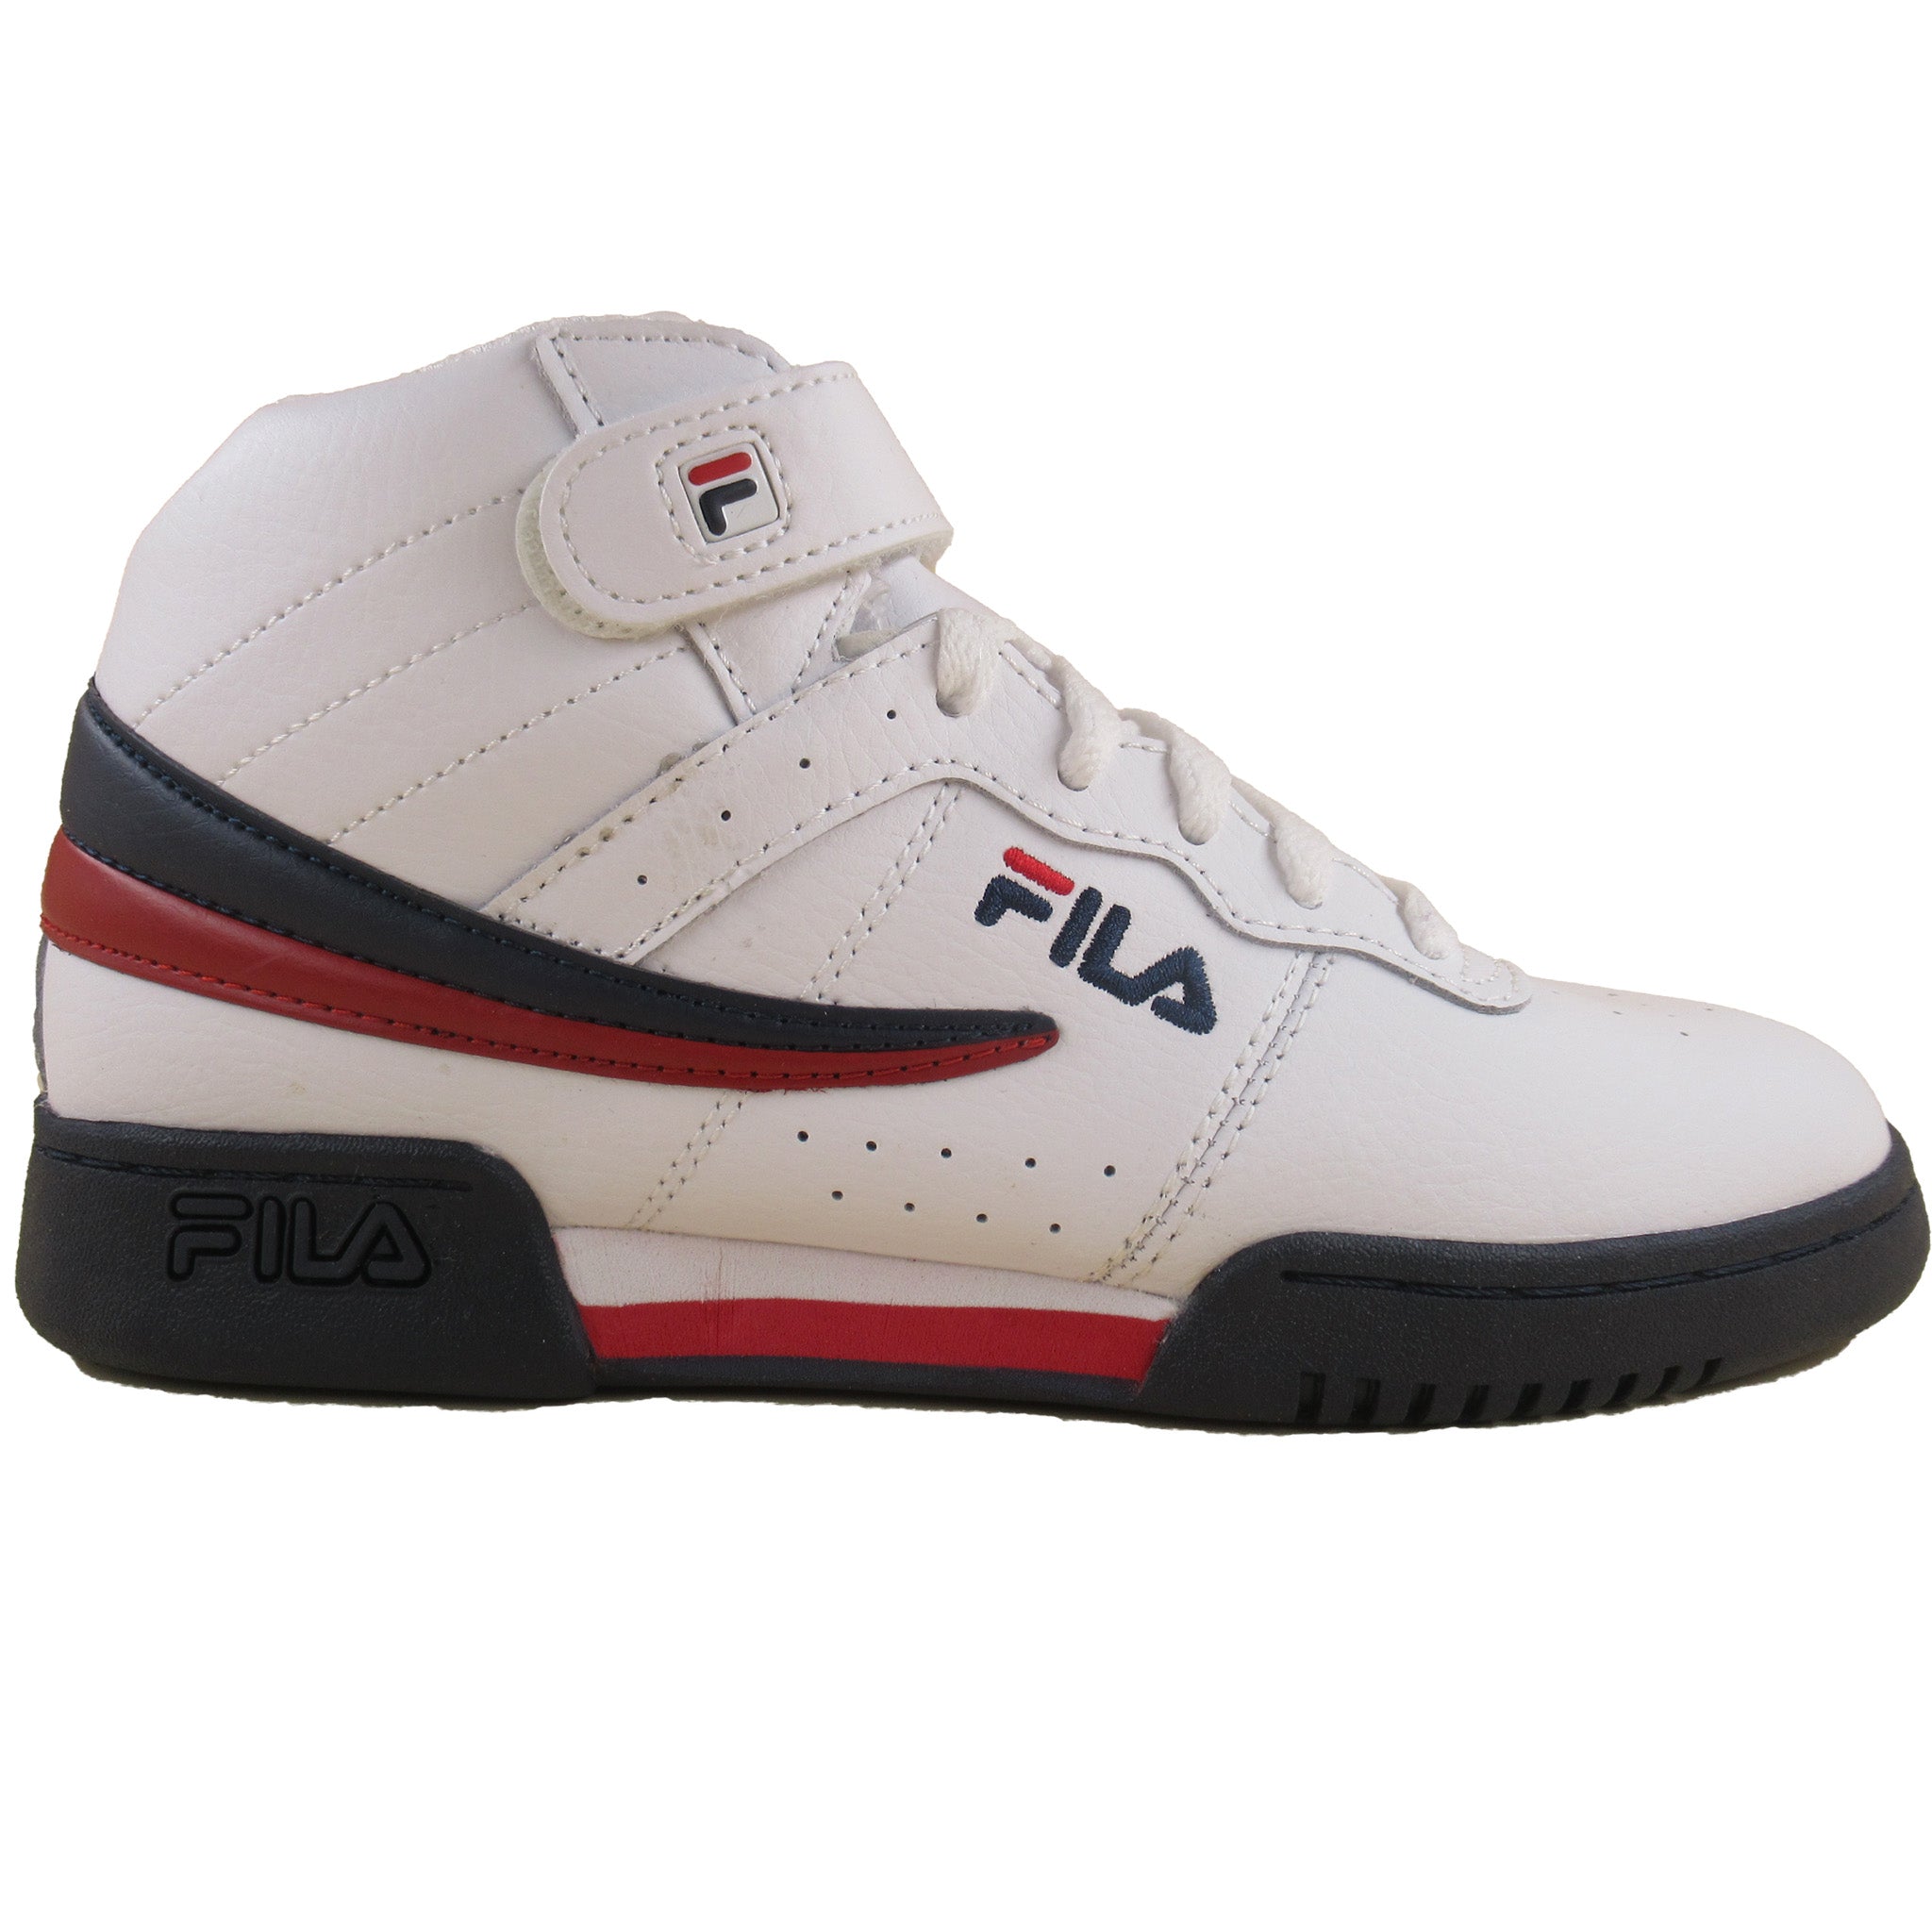 Athletic Store Navy F-13 and – Casual Shoes More That Grade-School Fila Kids Red Shoe White